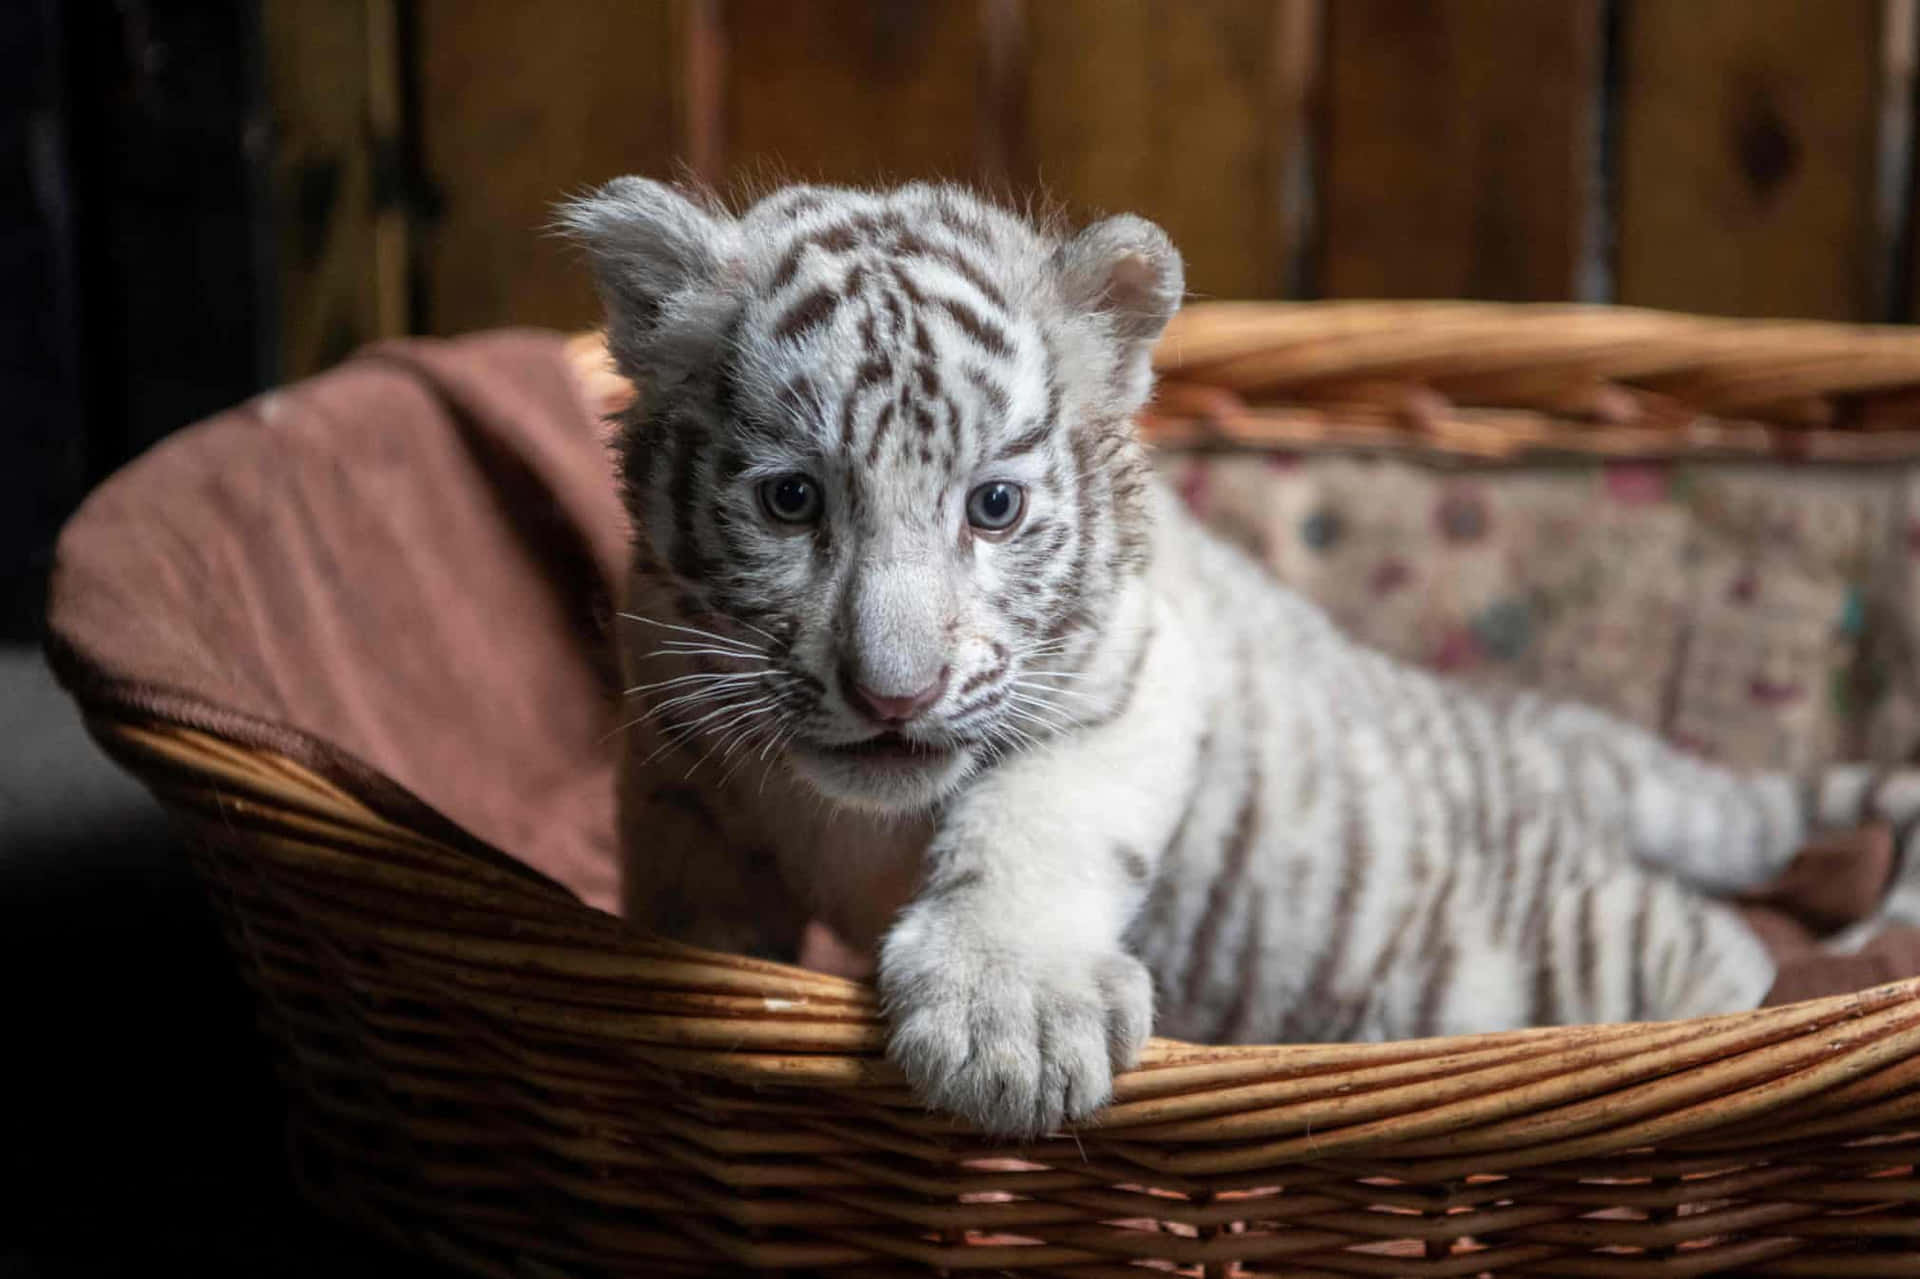 A White Tiger Is Sitting In A Basket